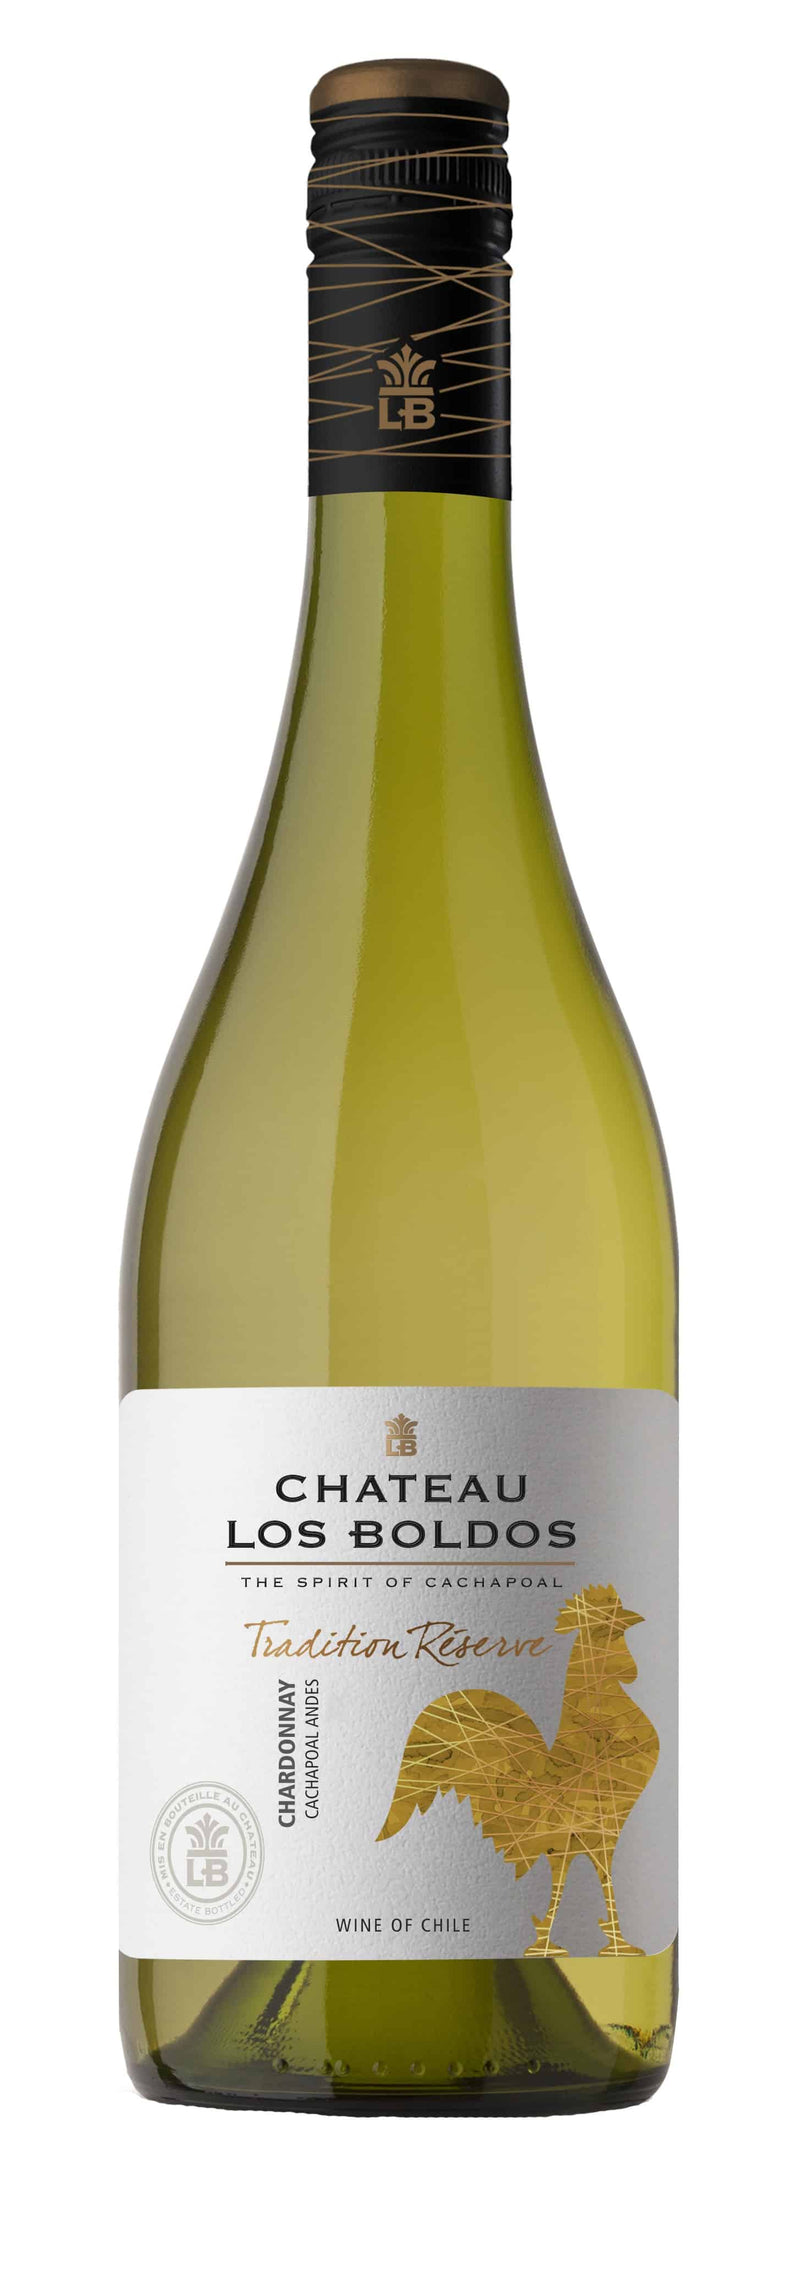 2017 Cachapoal Valley Chardonnay, Château Los Boldos Tradition Réserve, Cachapoal Andes, Chile